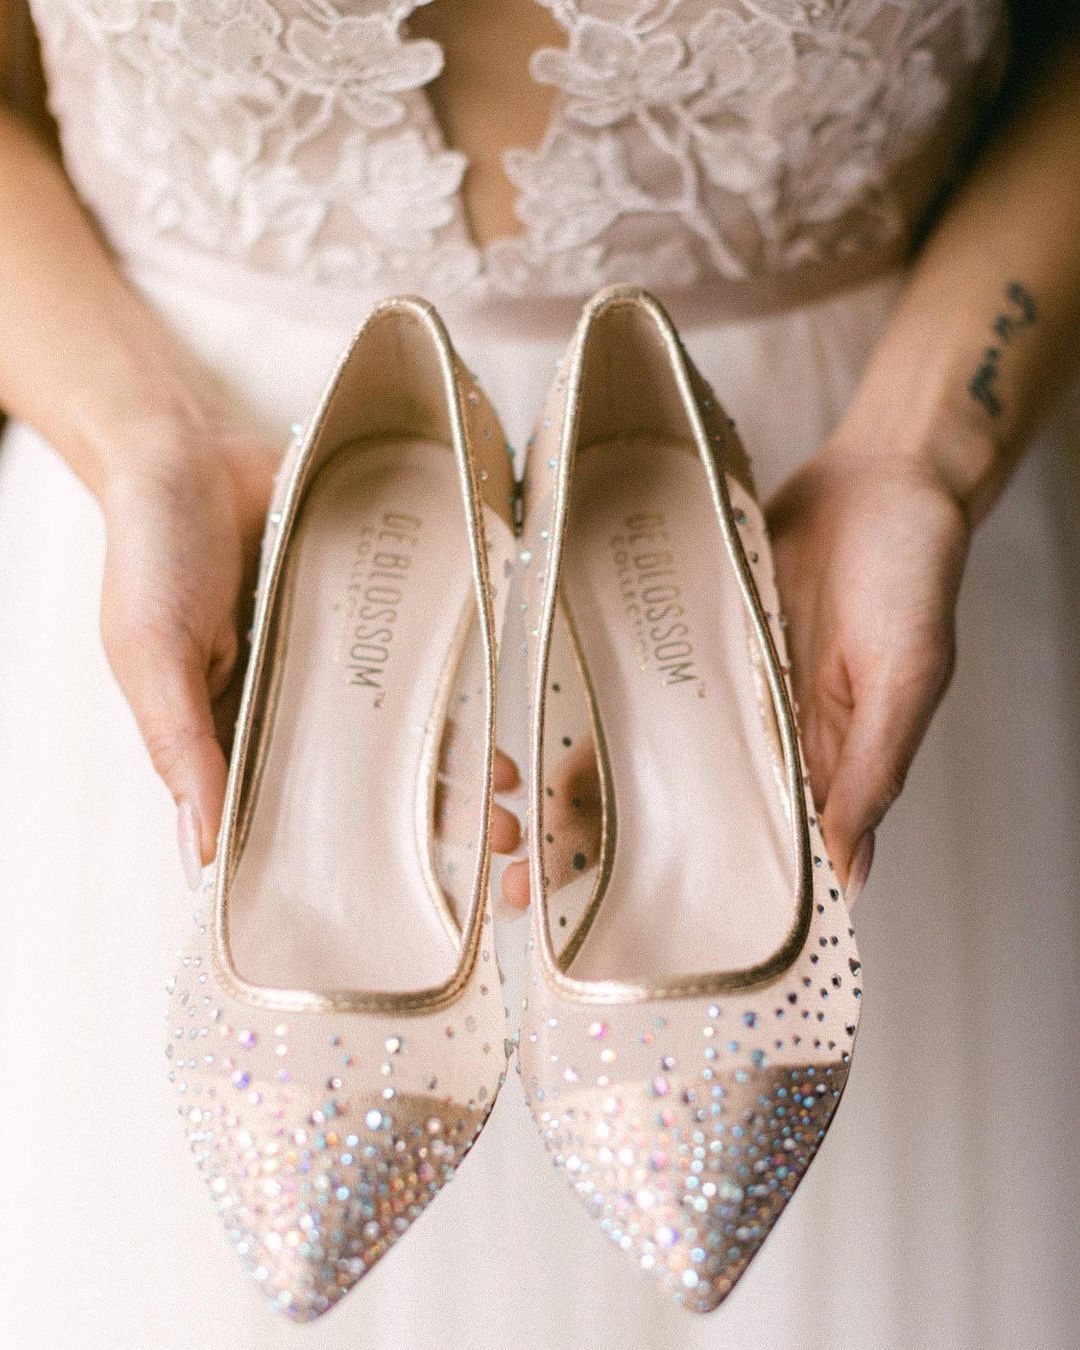 Bridal Shoes, Wedding Day Heels & Shoes for Bride